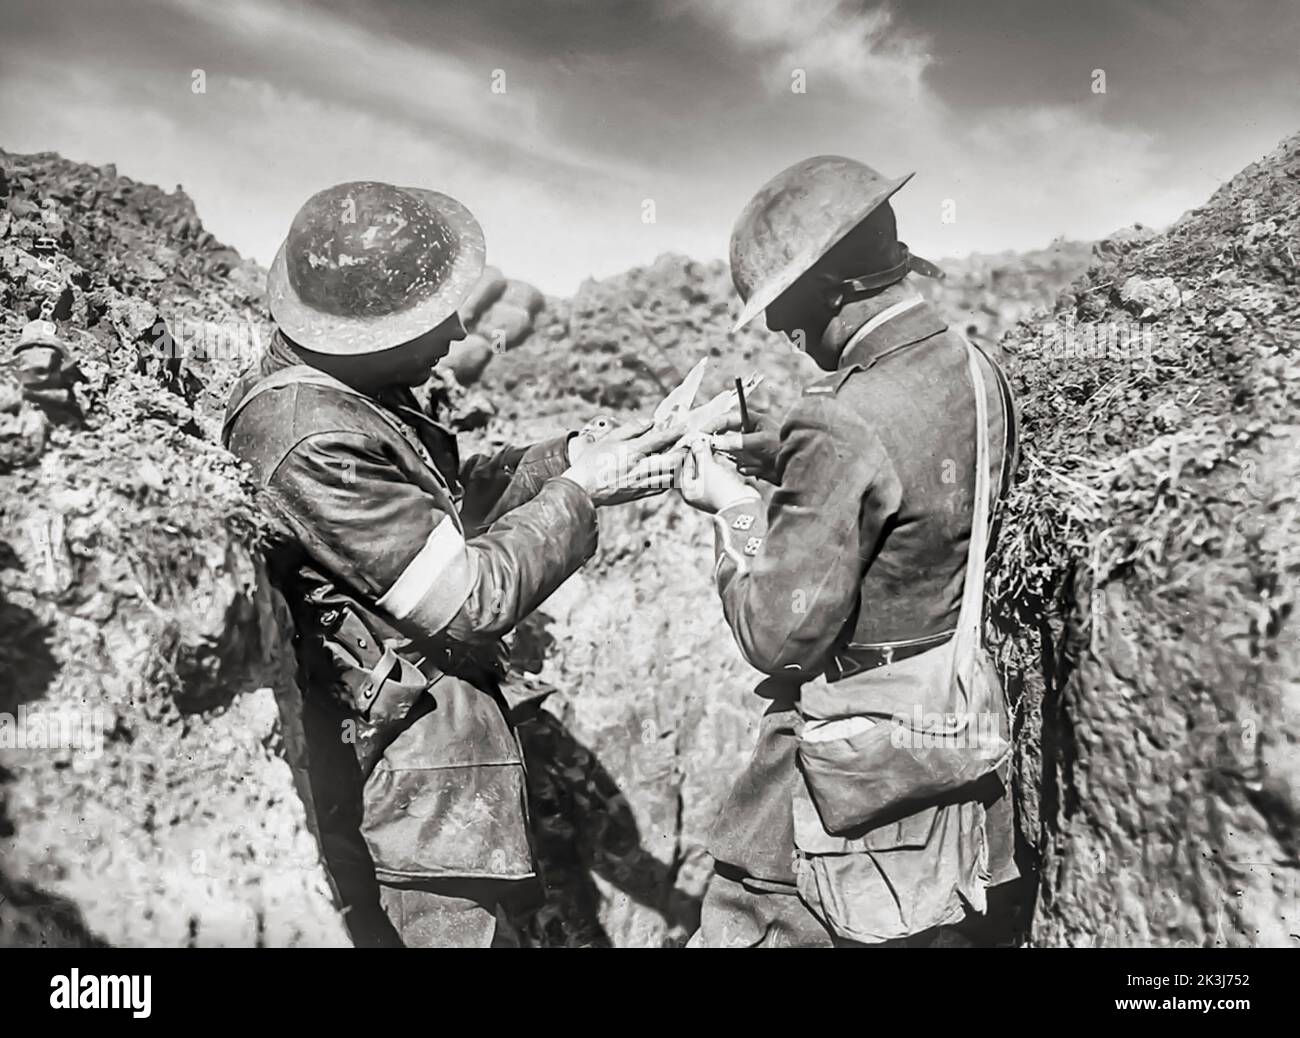 A message is attached to a carrier pigeon by British troops on the Western Front in 1917. One of France’s homing pigeons, named Cher Ami, was awarded the French “Croix de Guerre with Palm” for heroic service delivering 12 important messages during the Battle of Verdun. Stock Photo